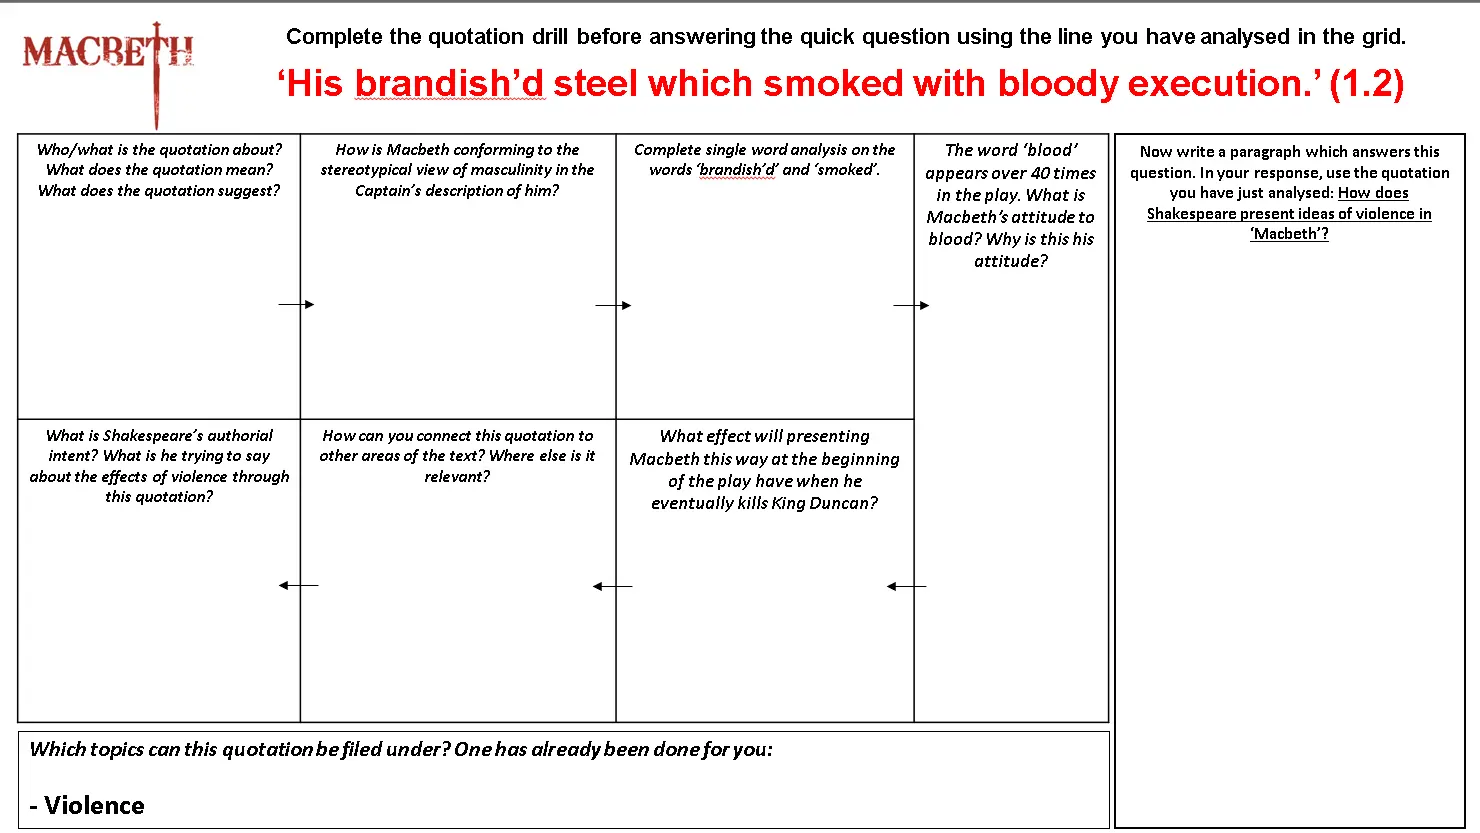 smoked with bloody execution analysis - What is the analysis of brandished steel in Macbeth